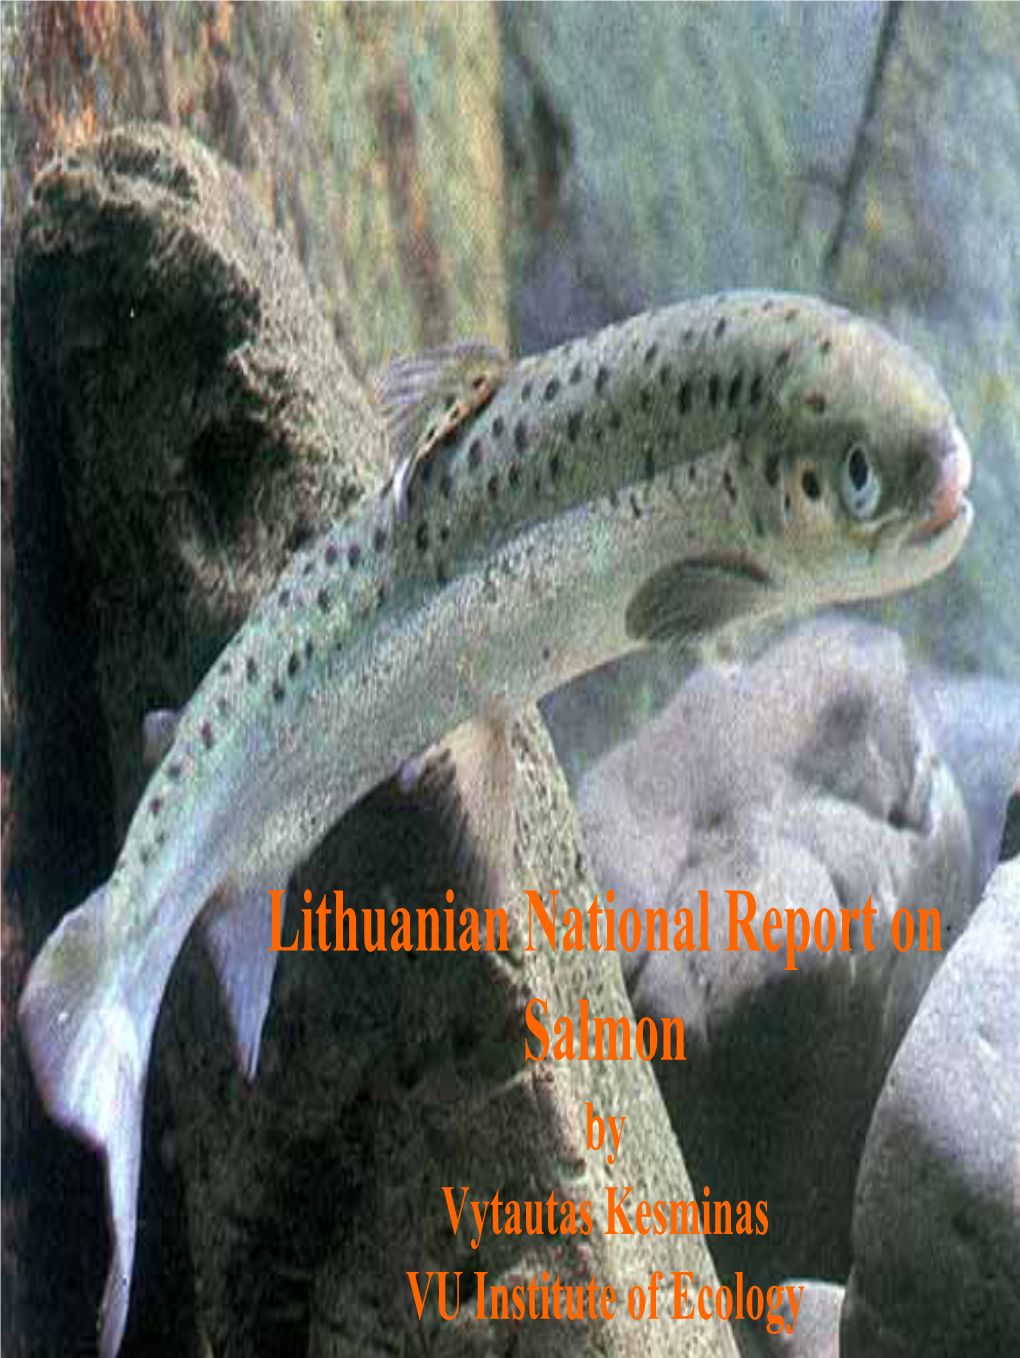 Lithuanian National Report on Salmon by Vytautas Kesminas VU Institute of Ecology INTRODUCTION